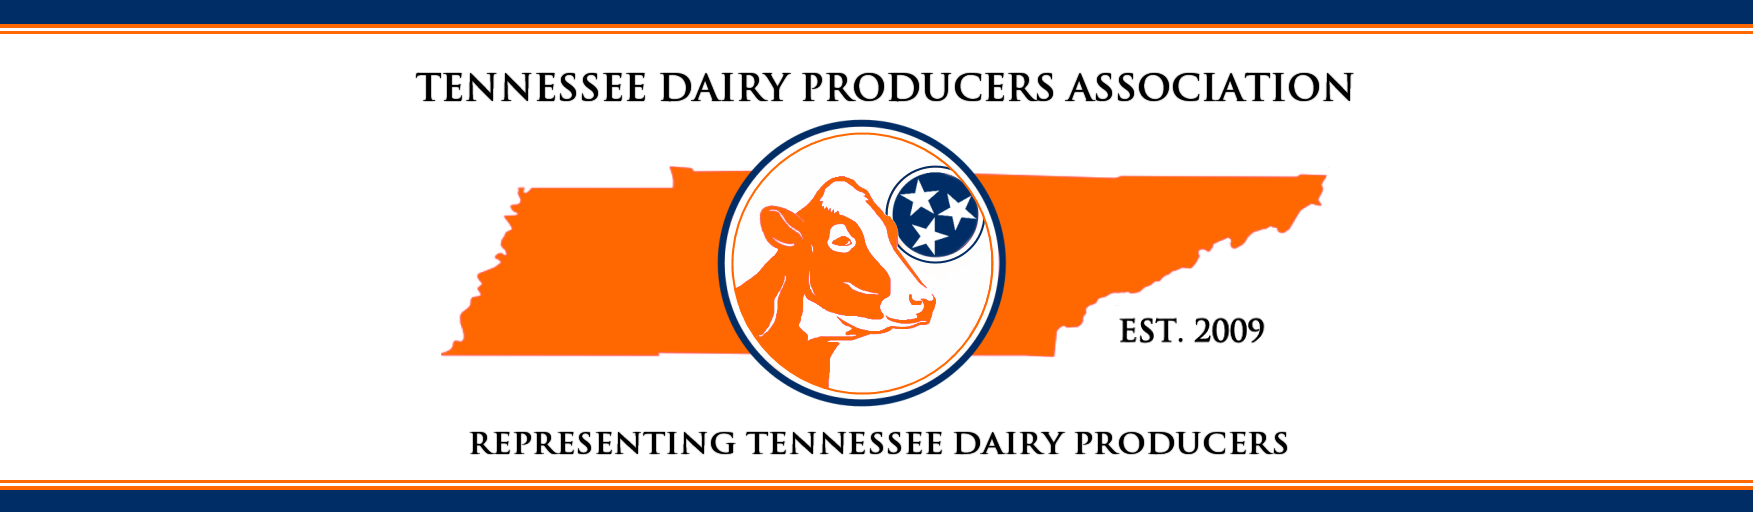 Tennessee Dairy Producers Association